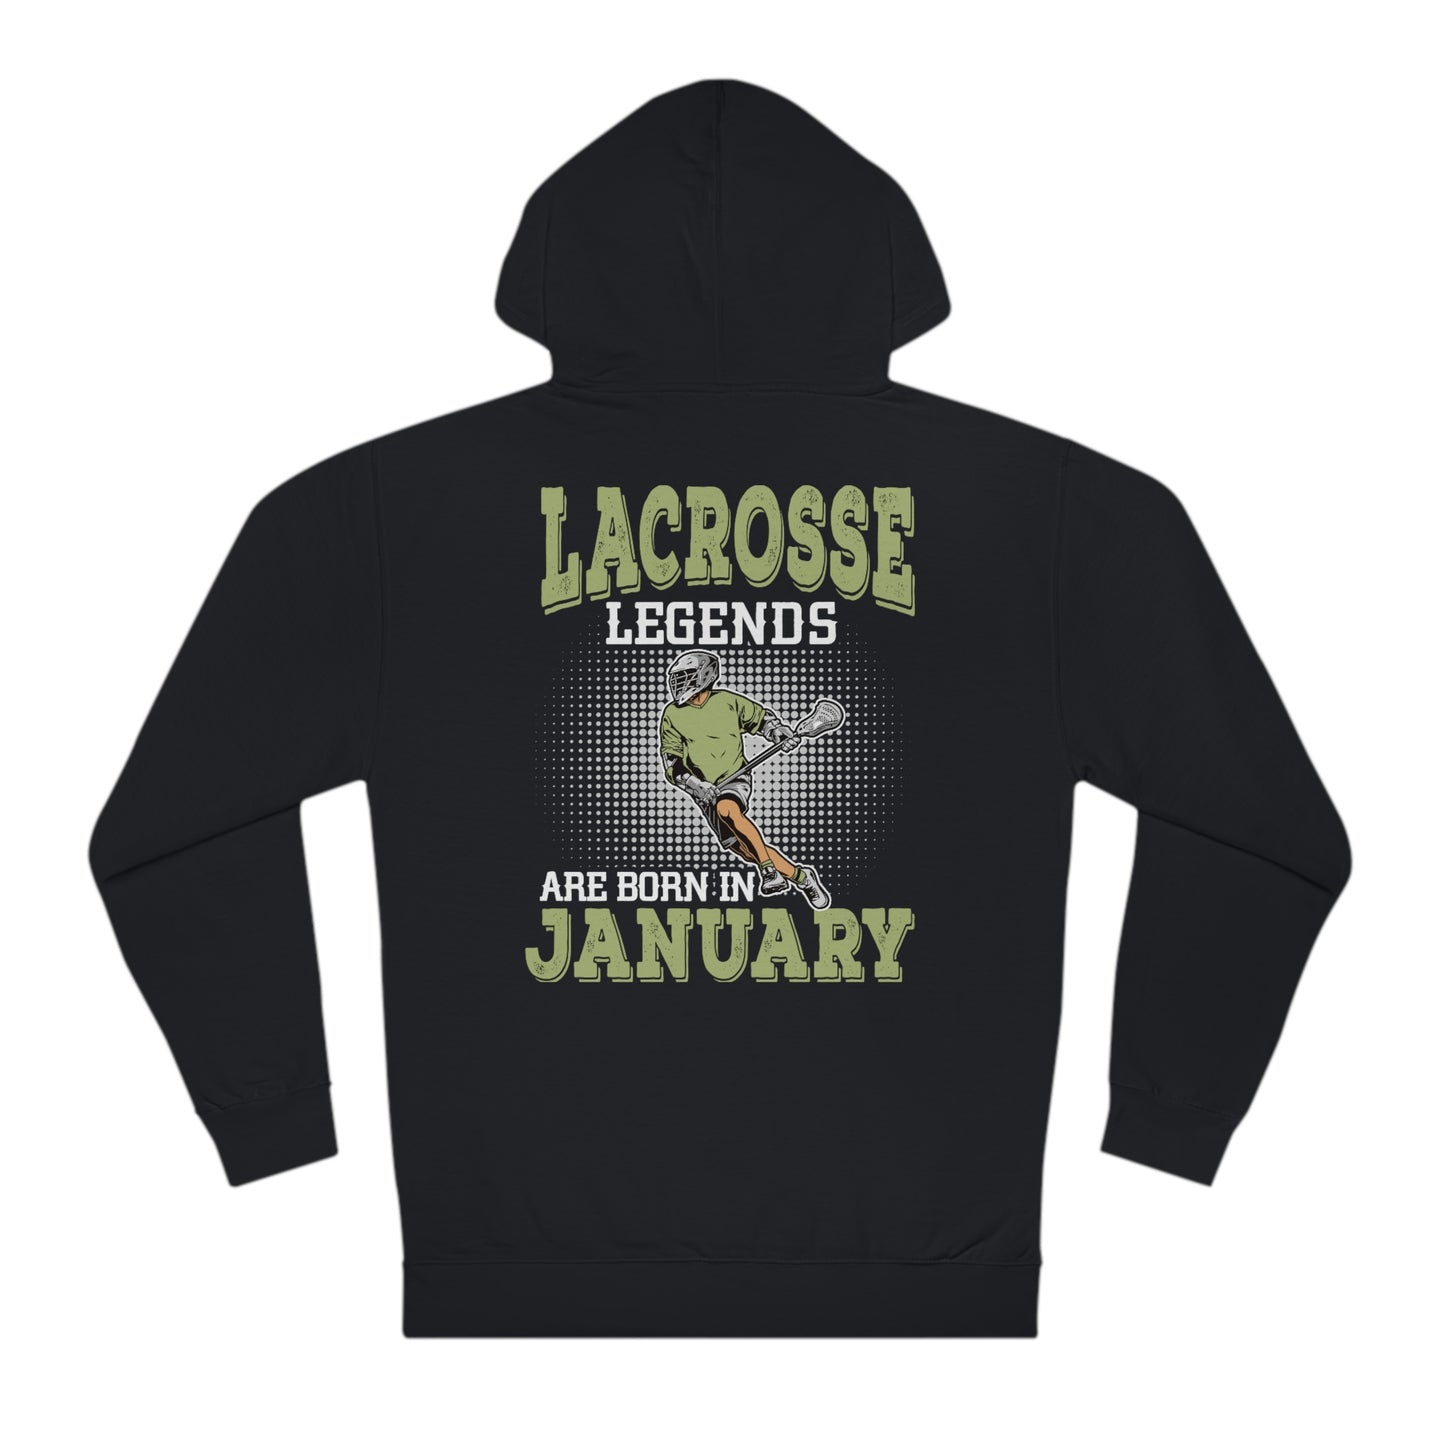 LACROSSE LEGENDS ARE BORN IN JANUARY Hoodie